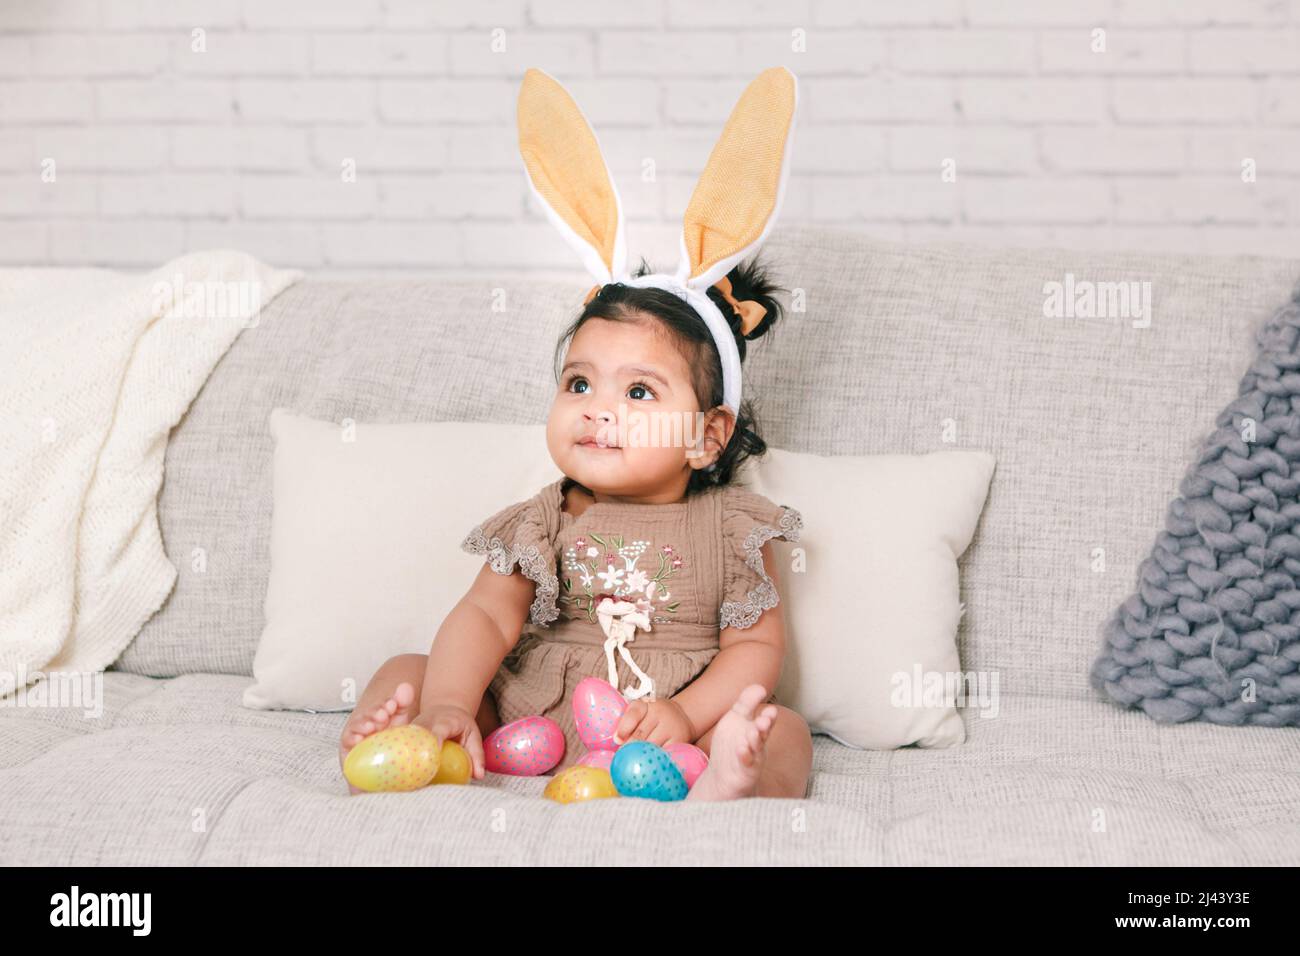 Cute Indian baby girl with pink bunny ears playing with colorful eggs candies toys celebrating Easter holiday. Stock Photo